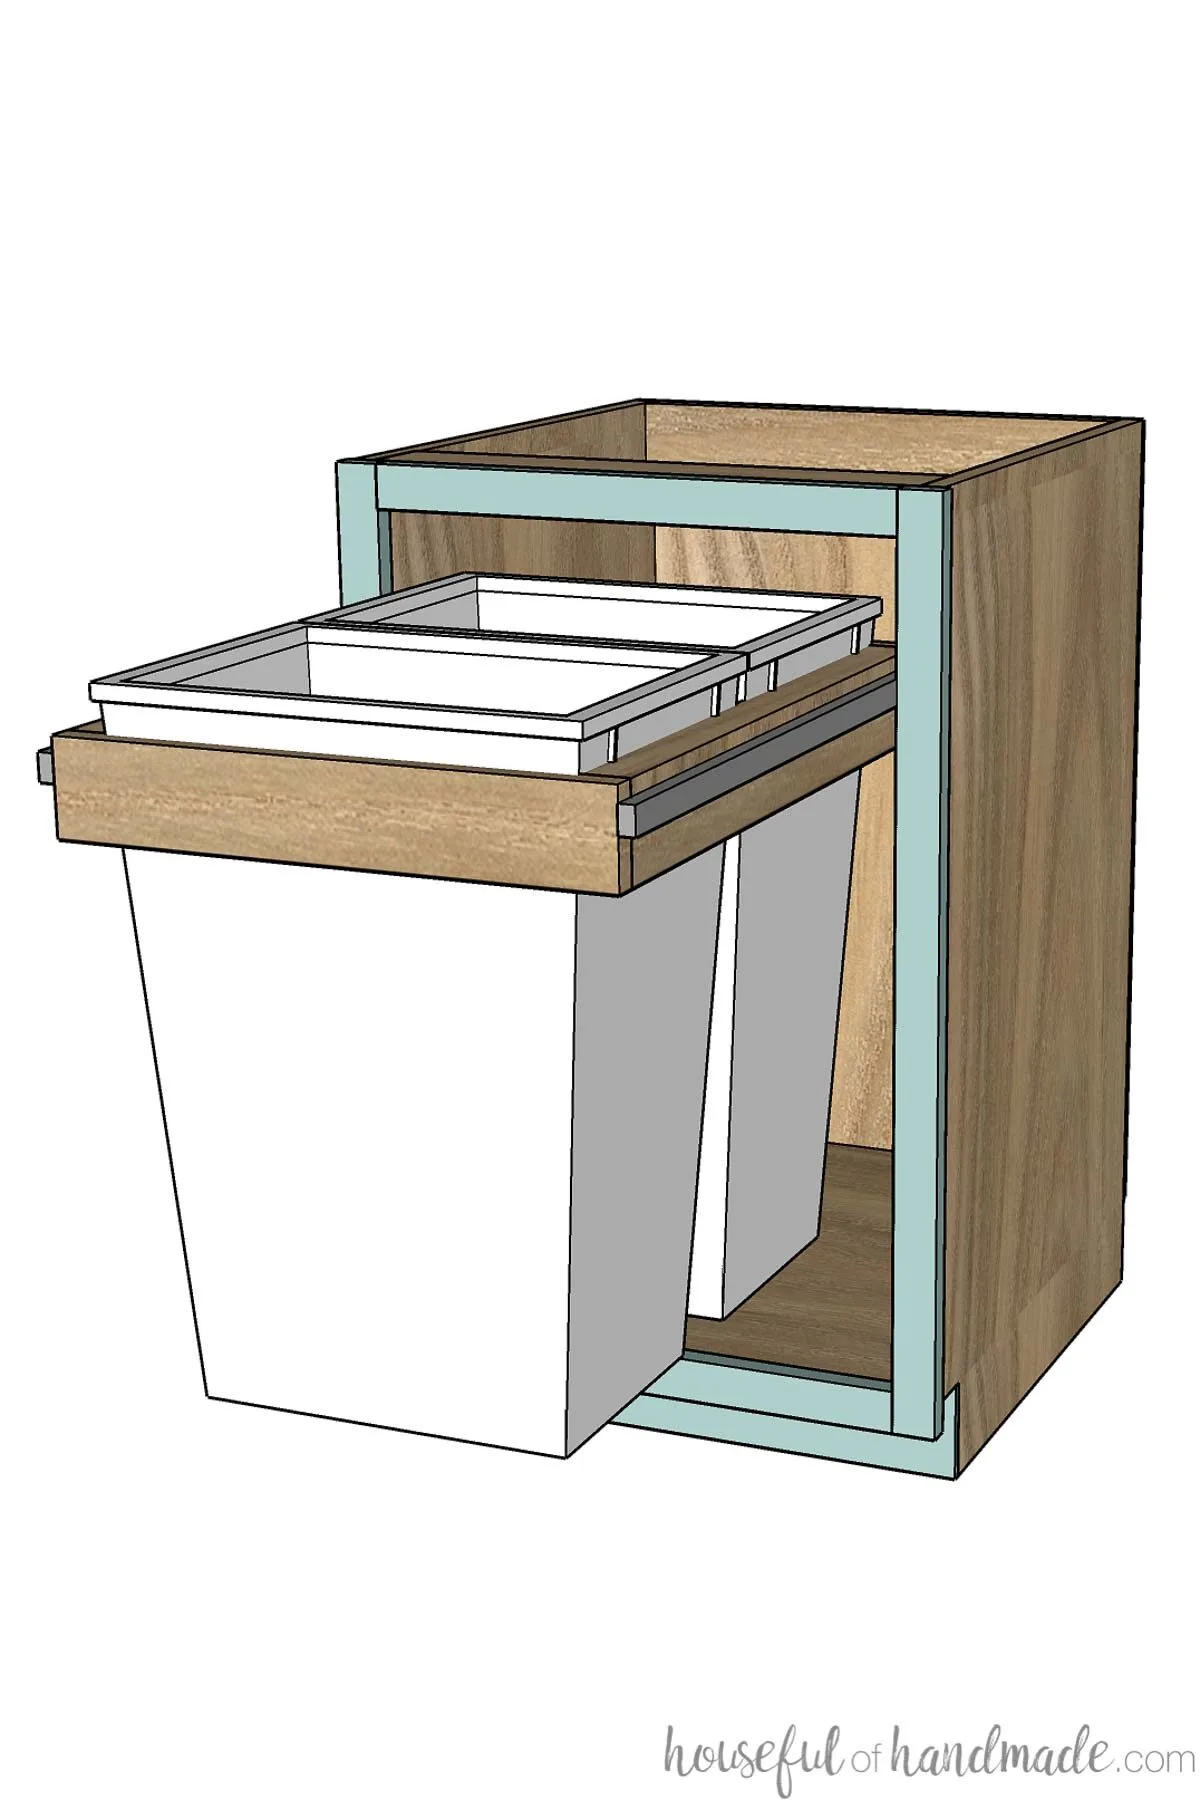 SketchUp drawing of a garbage can cabinet with two cans slide out on drawer slides. 